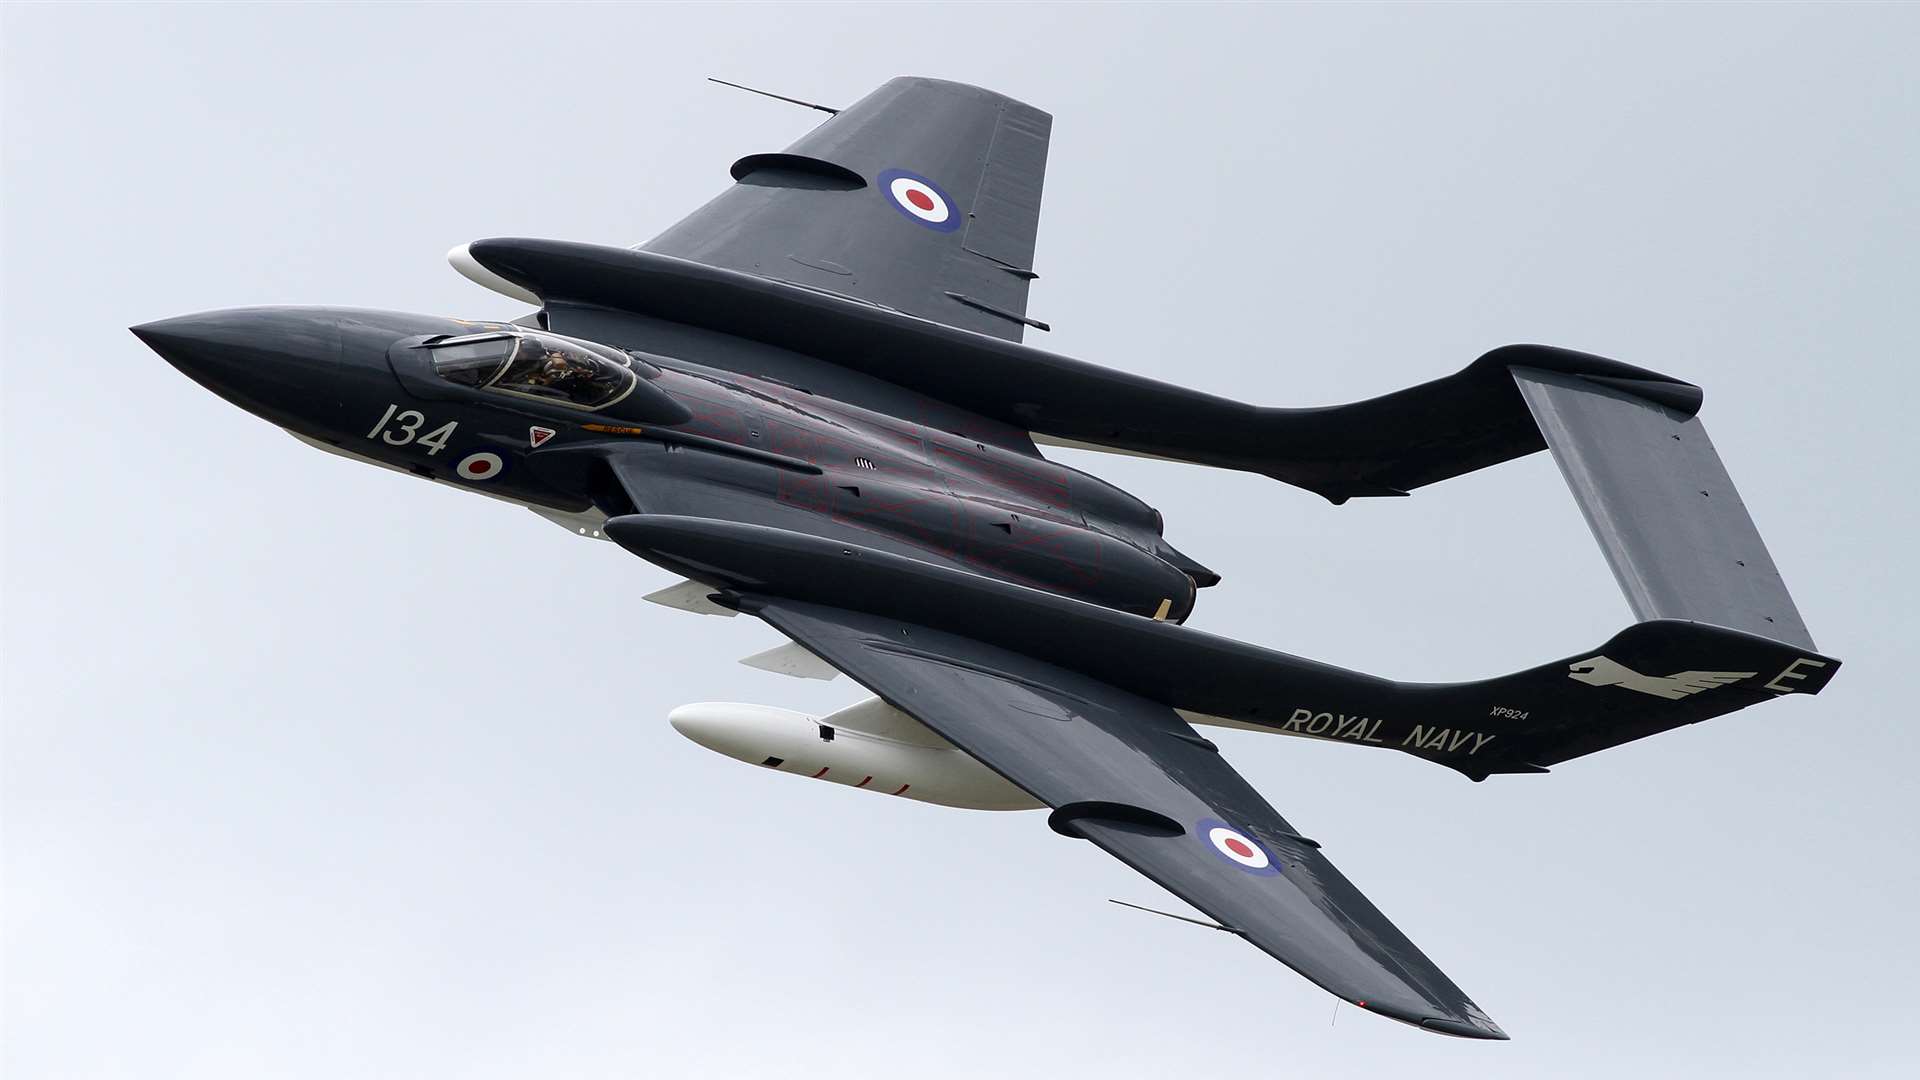 The Sea Vixen has been added to this year's Herne Bay air show